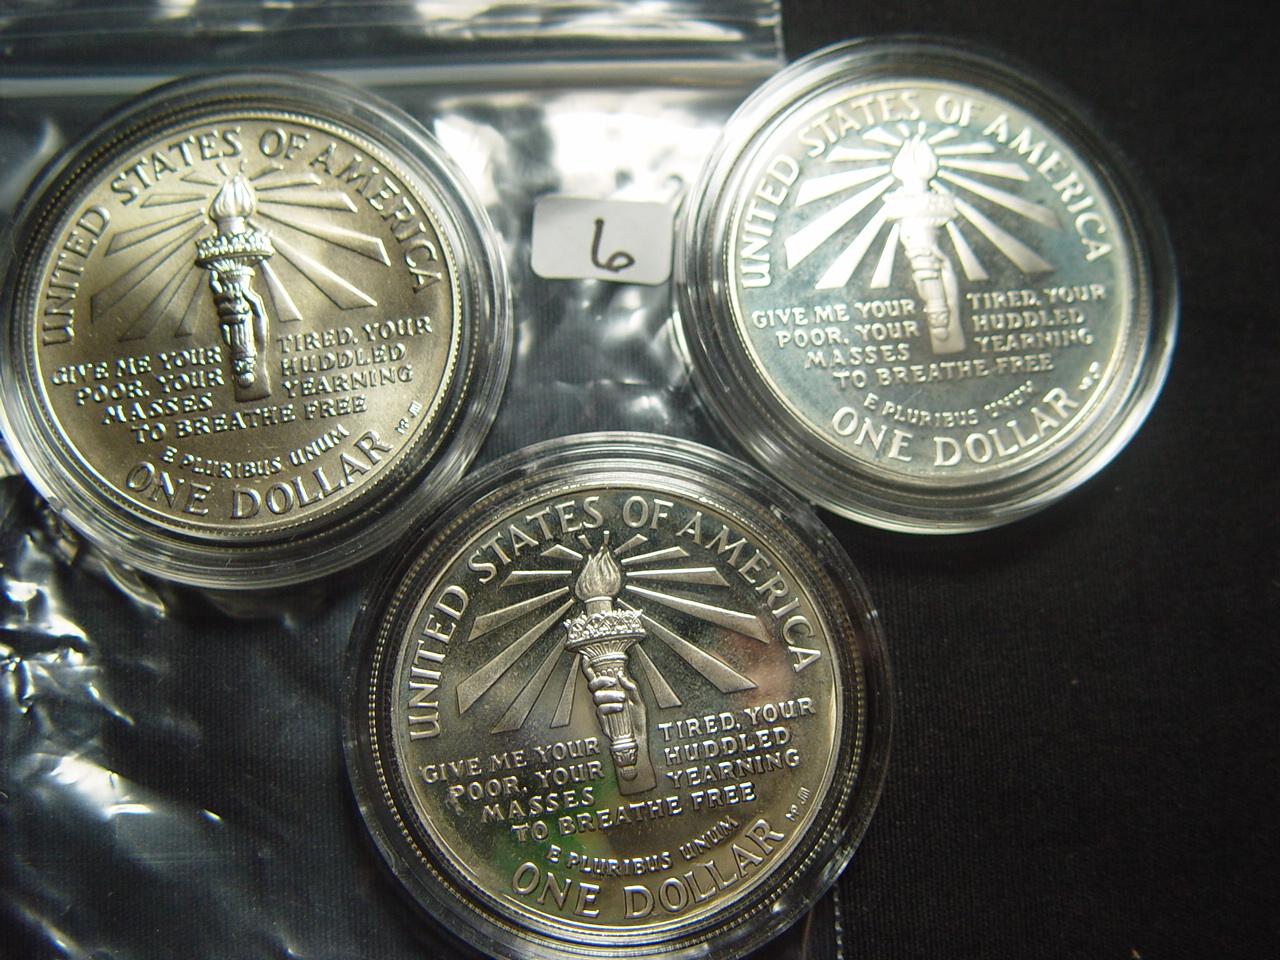 Three 1986 Statue of Liberty Silver Dollars: Two Proof & One BU